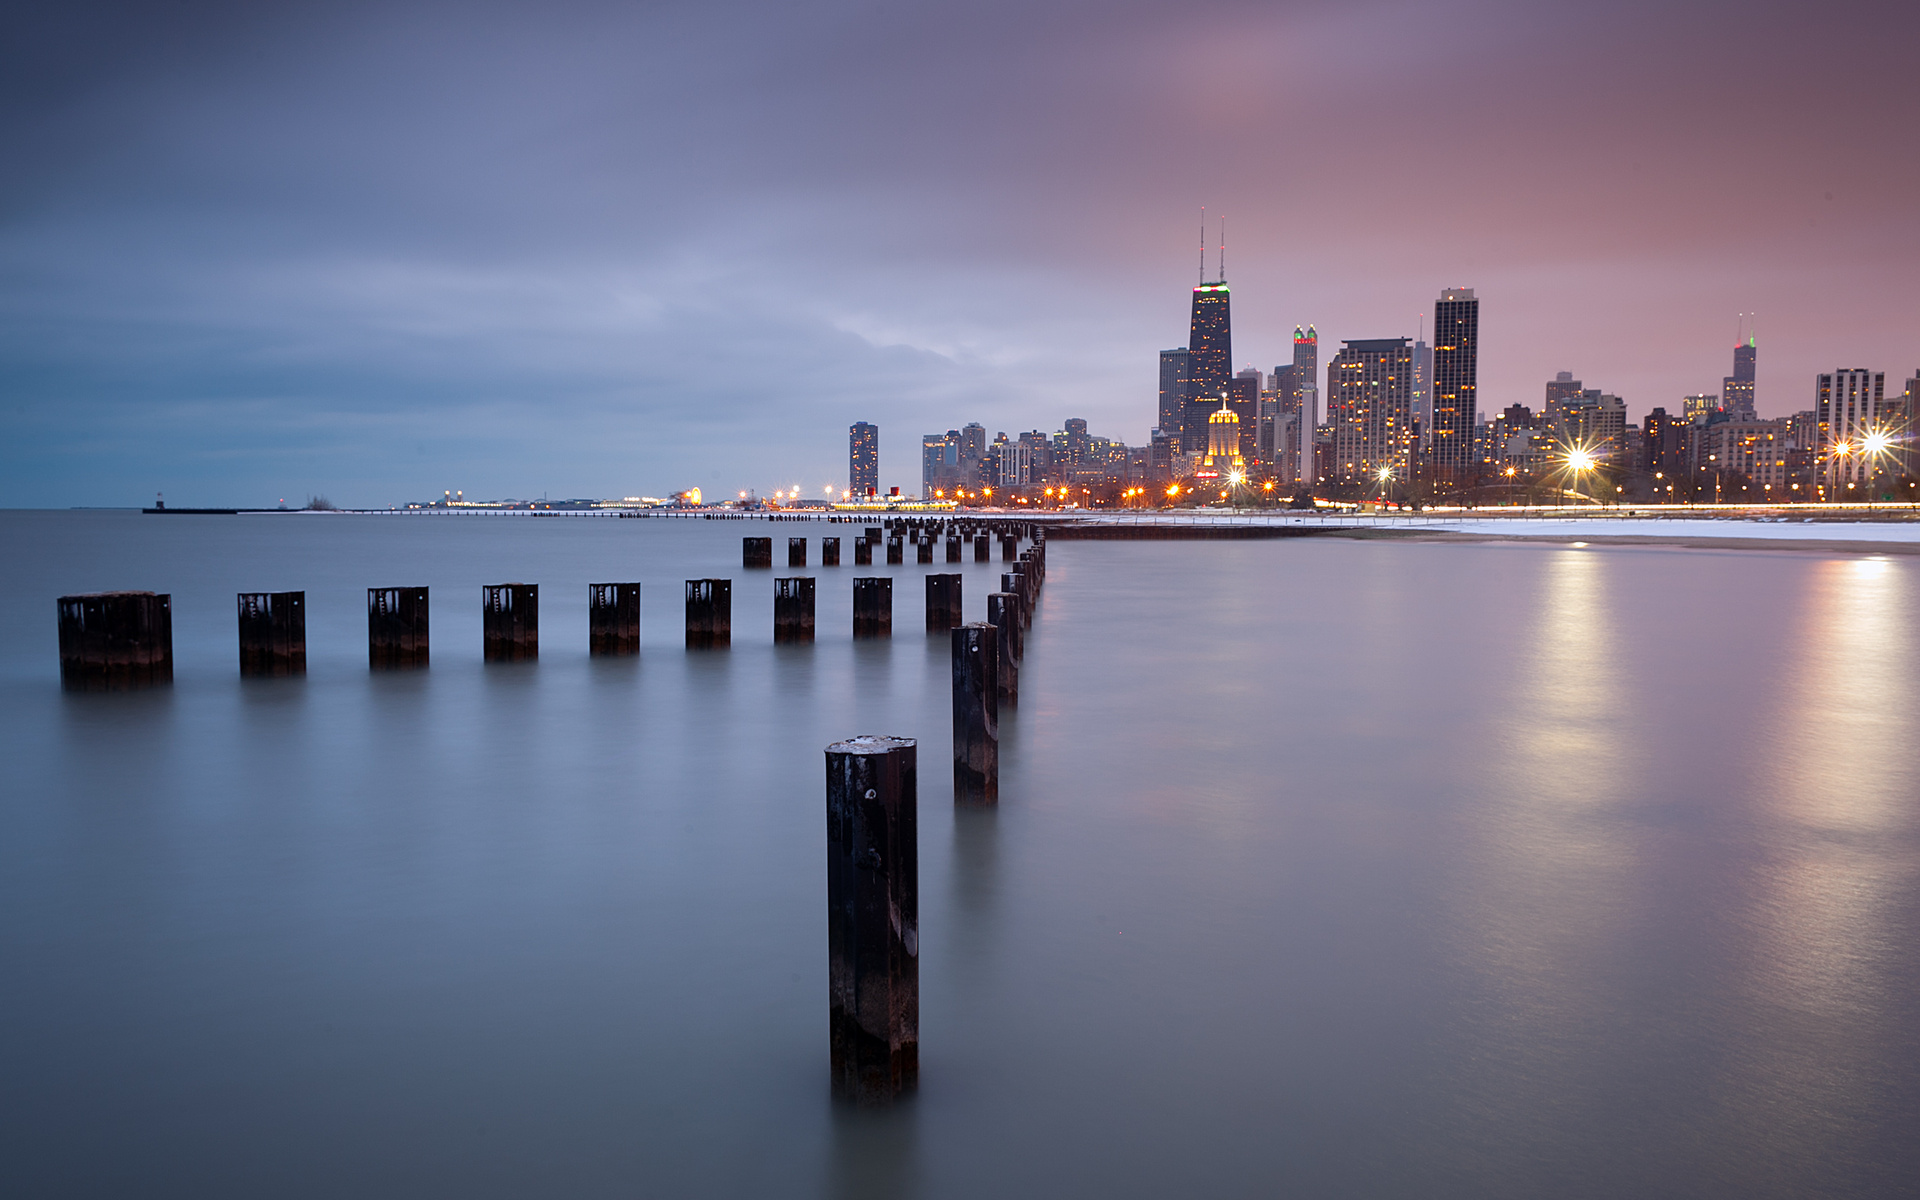 illinois, Chicago, World, Cities, Architecture, Buildings, Skyscraper, Window, Signs, Night, Lights, Post, Lakes, Water, Skyline, Cityscape, Reflection Wallpaper